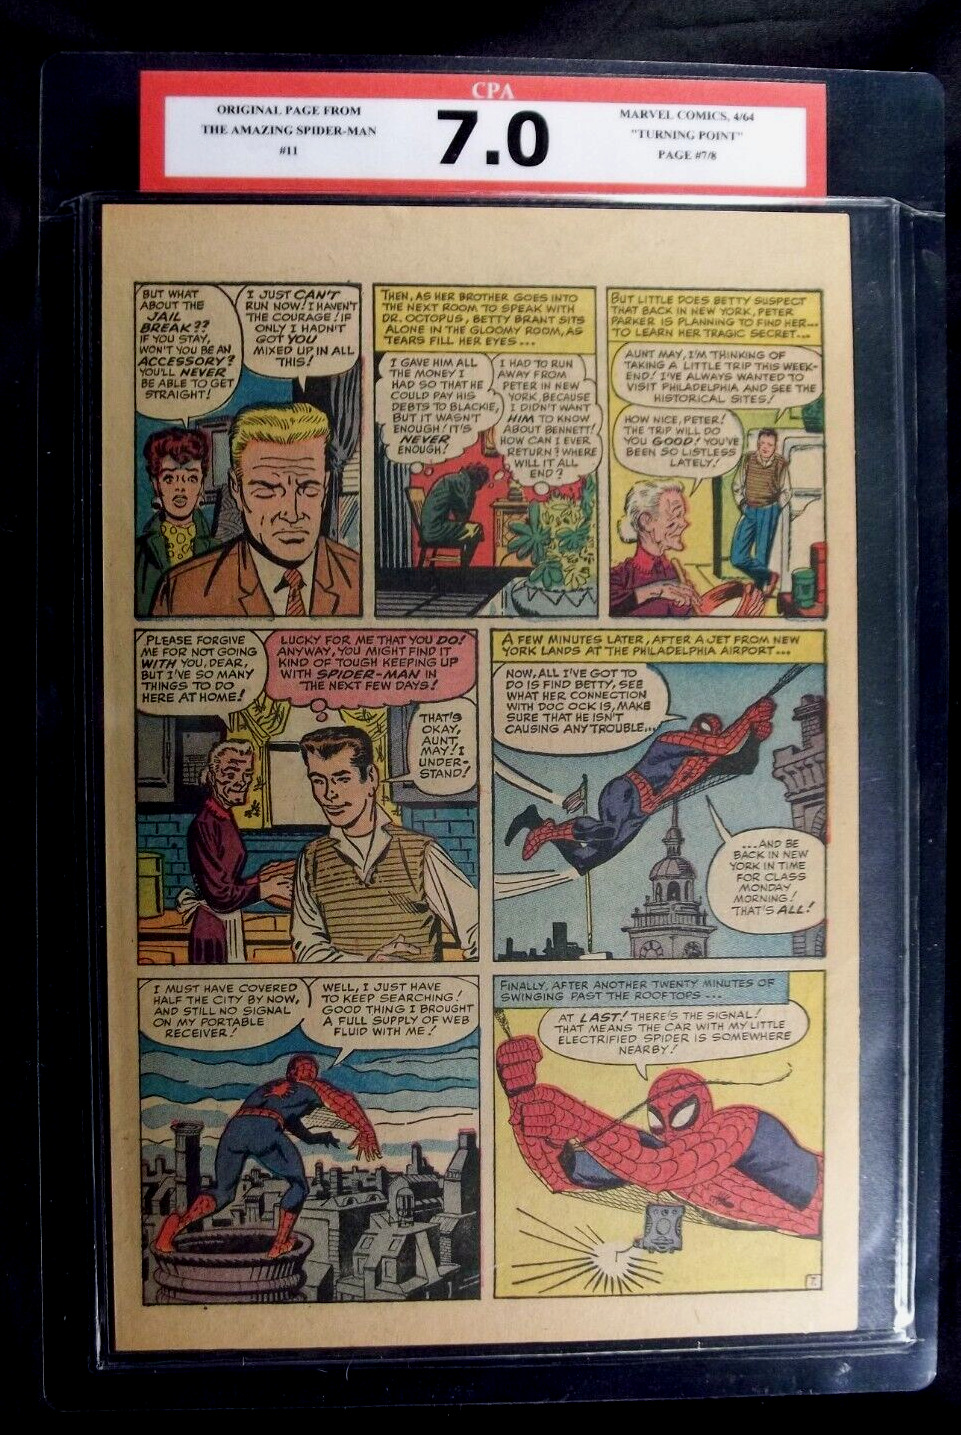 Amazing Spider-man #11 CPA 7.0 SINGLE PAGE #7/8 2nd app. Doctor Octopus